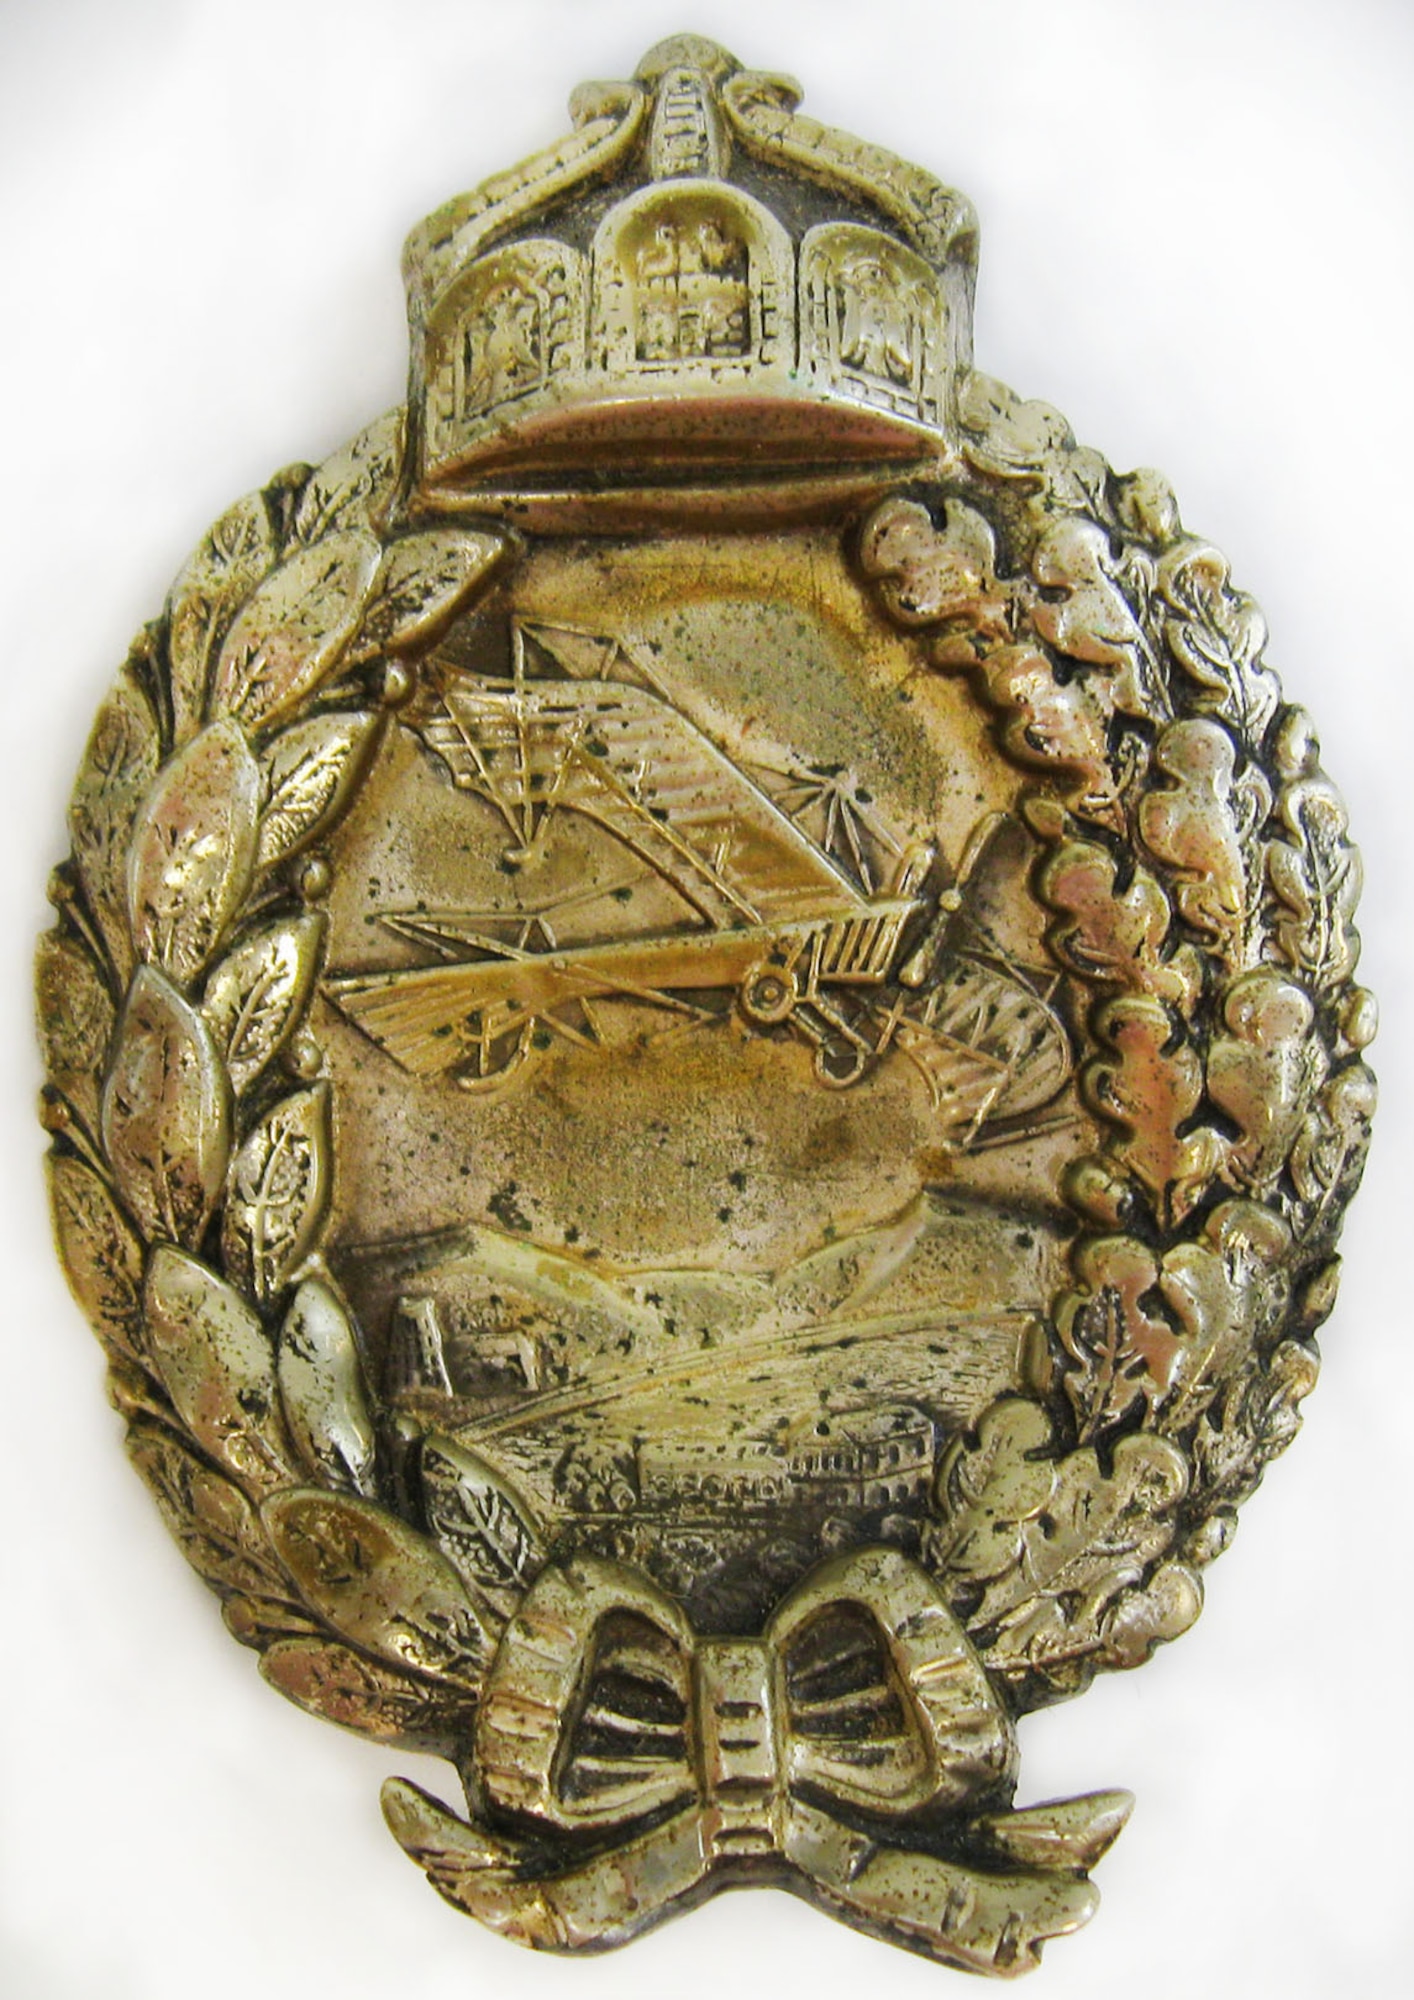 At the outbreak of World War I, LeRoy J. Prinz went to France to train as a pilot. Initially, he served in the French Aviation Corps, then with the 94th Aero Squadron and the 27th Aero Squadron. This aviator pin has a front design of a wreath with bow at bottom and a triptych crown at top. Centered within the wreath opening is a scene of an aircraft flying over mountains, fields and buildings in Europe. The back is engraved: HANS EHL,  SHOT DOWN,  JULY 1 1917,  BY LE ROY PRINZ (U.S. Air Force photo)